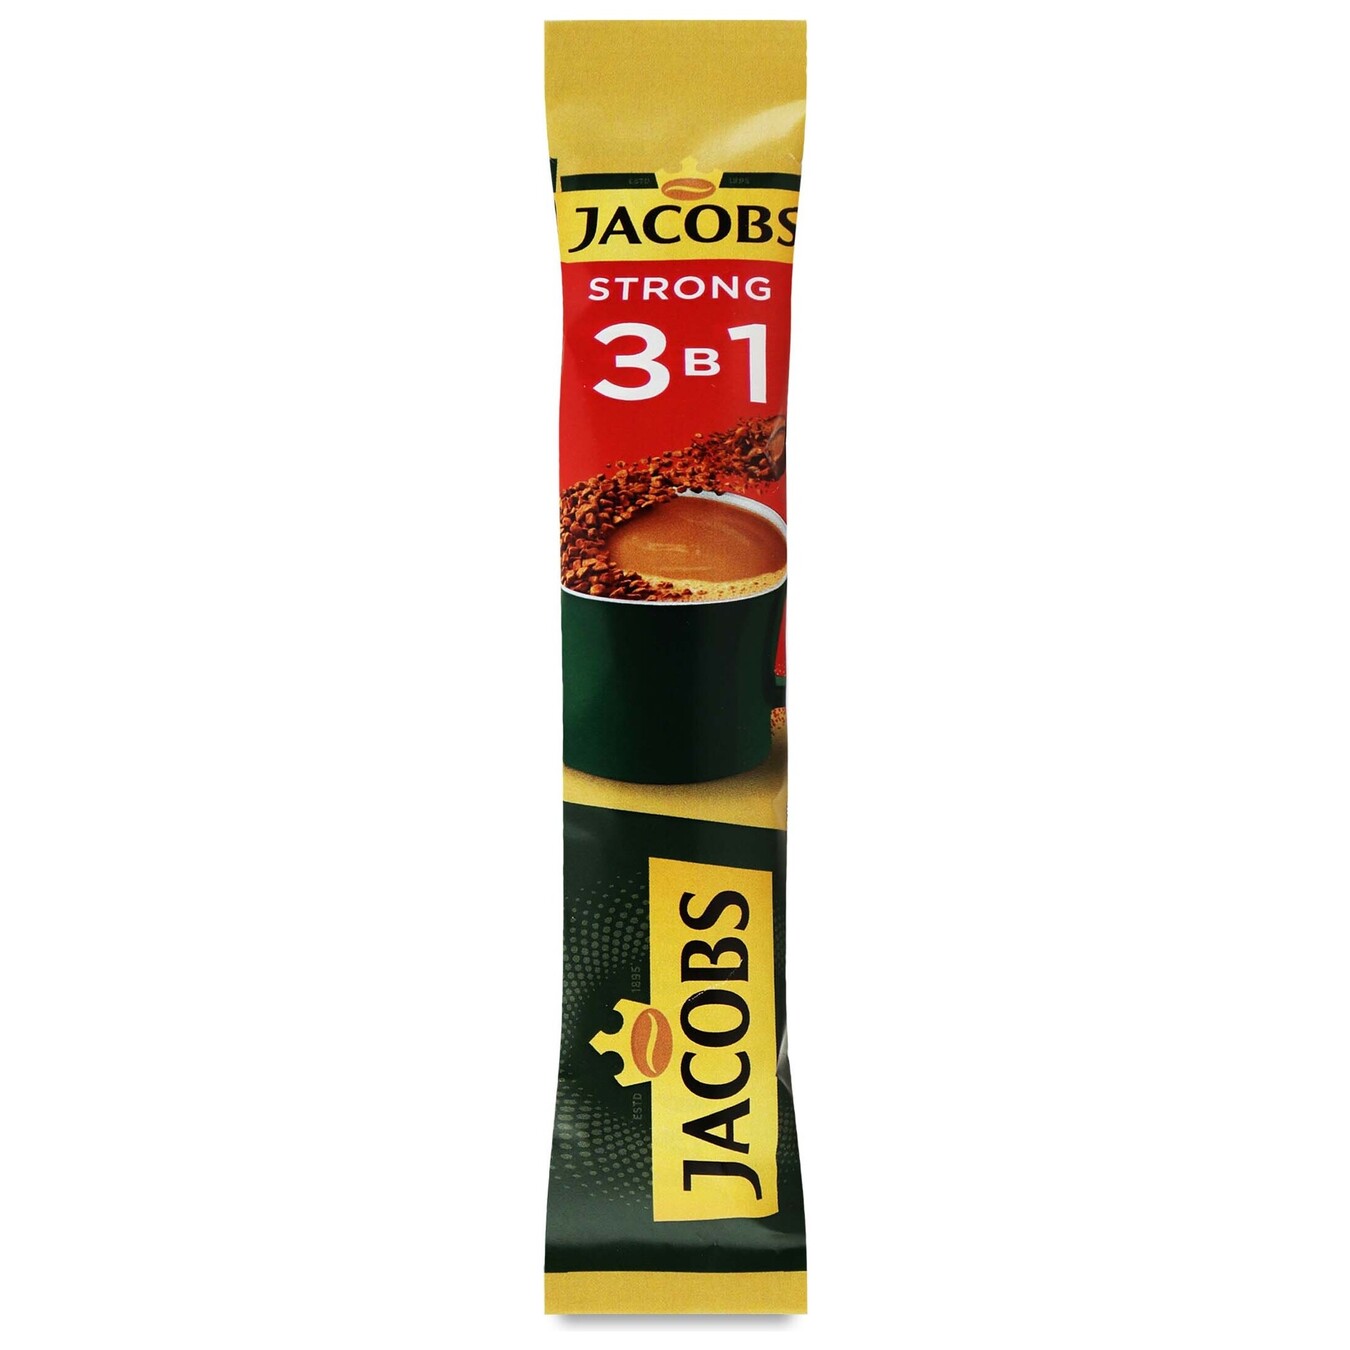 Coffee drink Jacobs instant 3 in 1 strong 24X12.9g